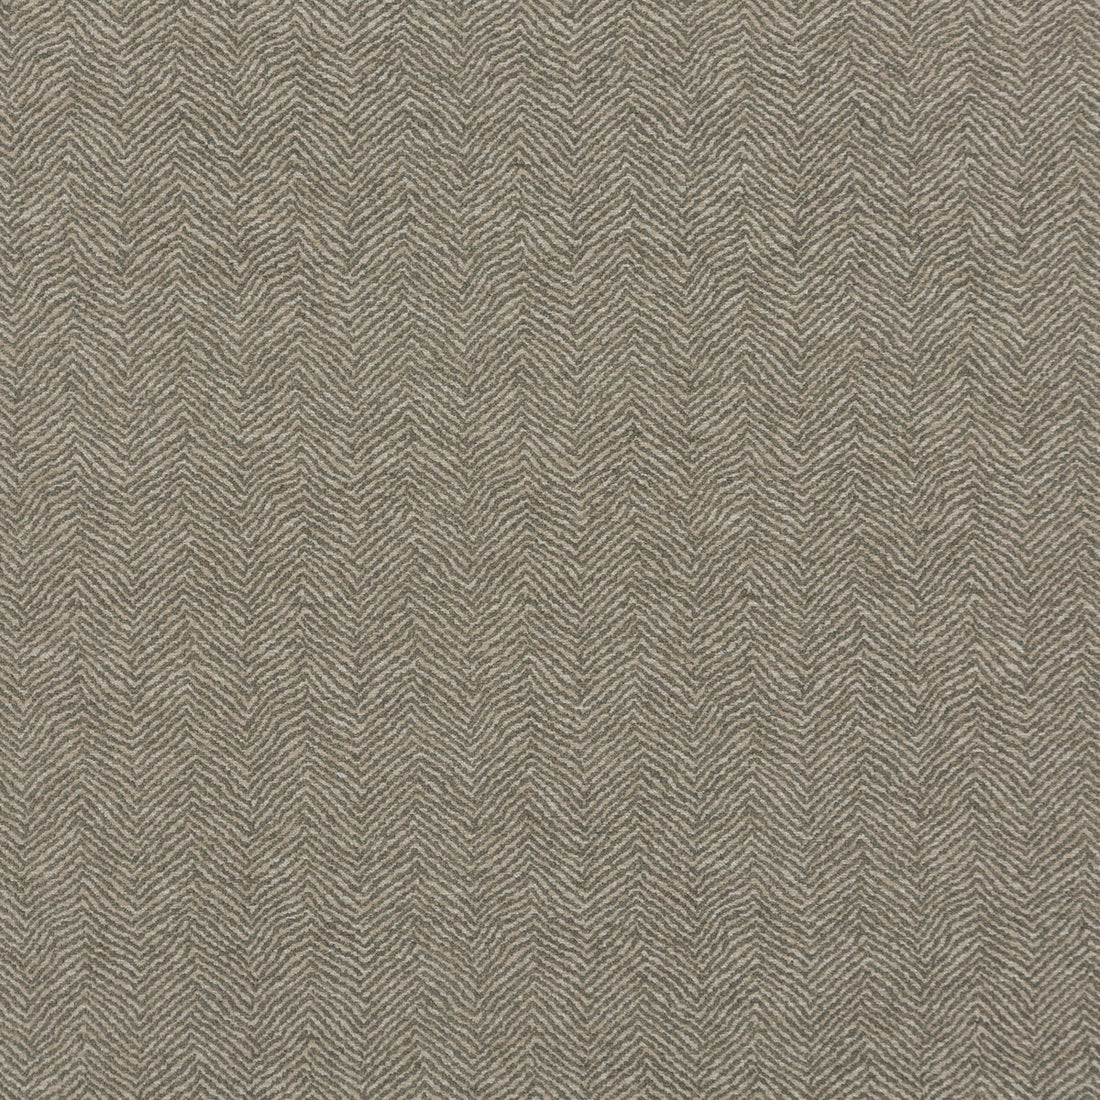 Summit fabric in woodsmoke color - pattern BF10677.935.0 - by G P &amp; J Baker in the Essential Colours collection